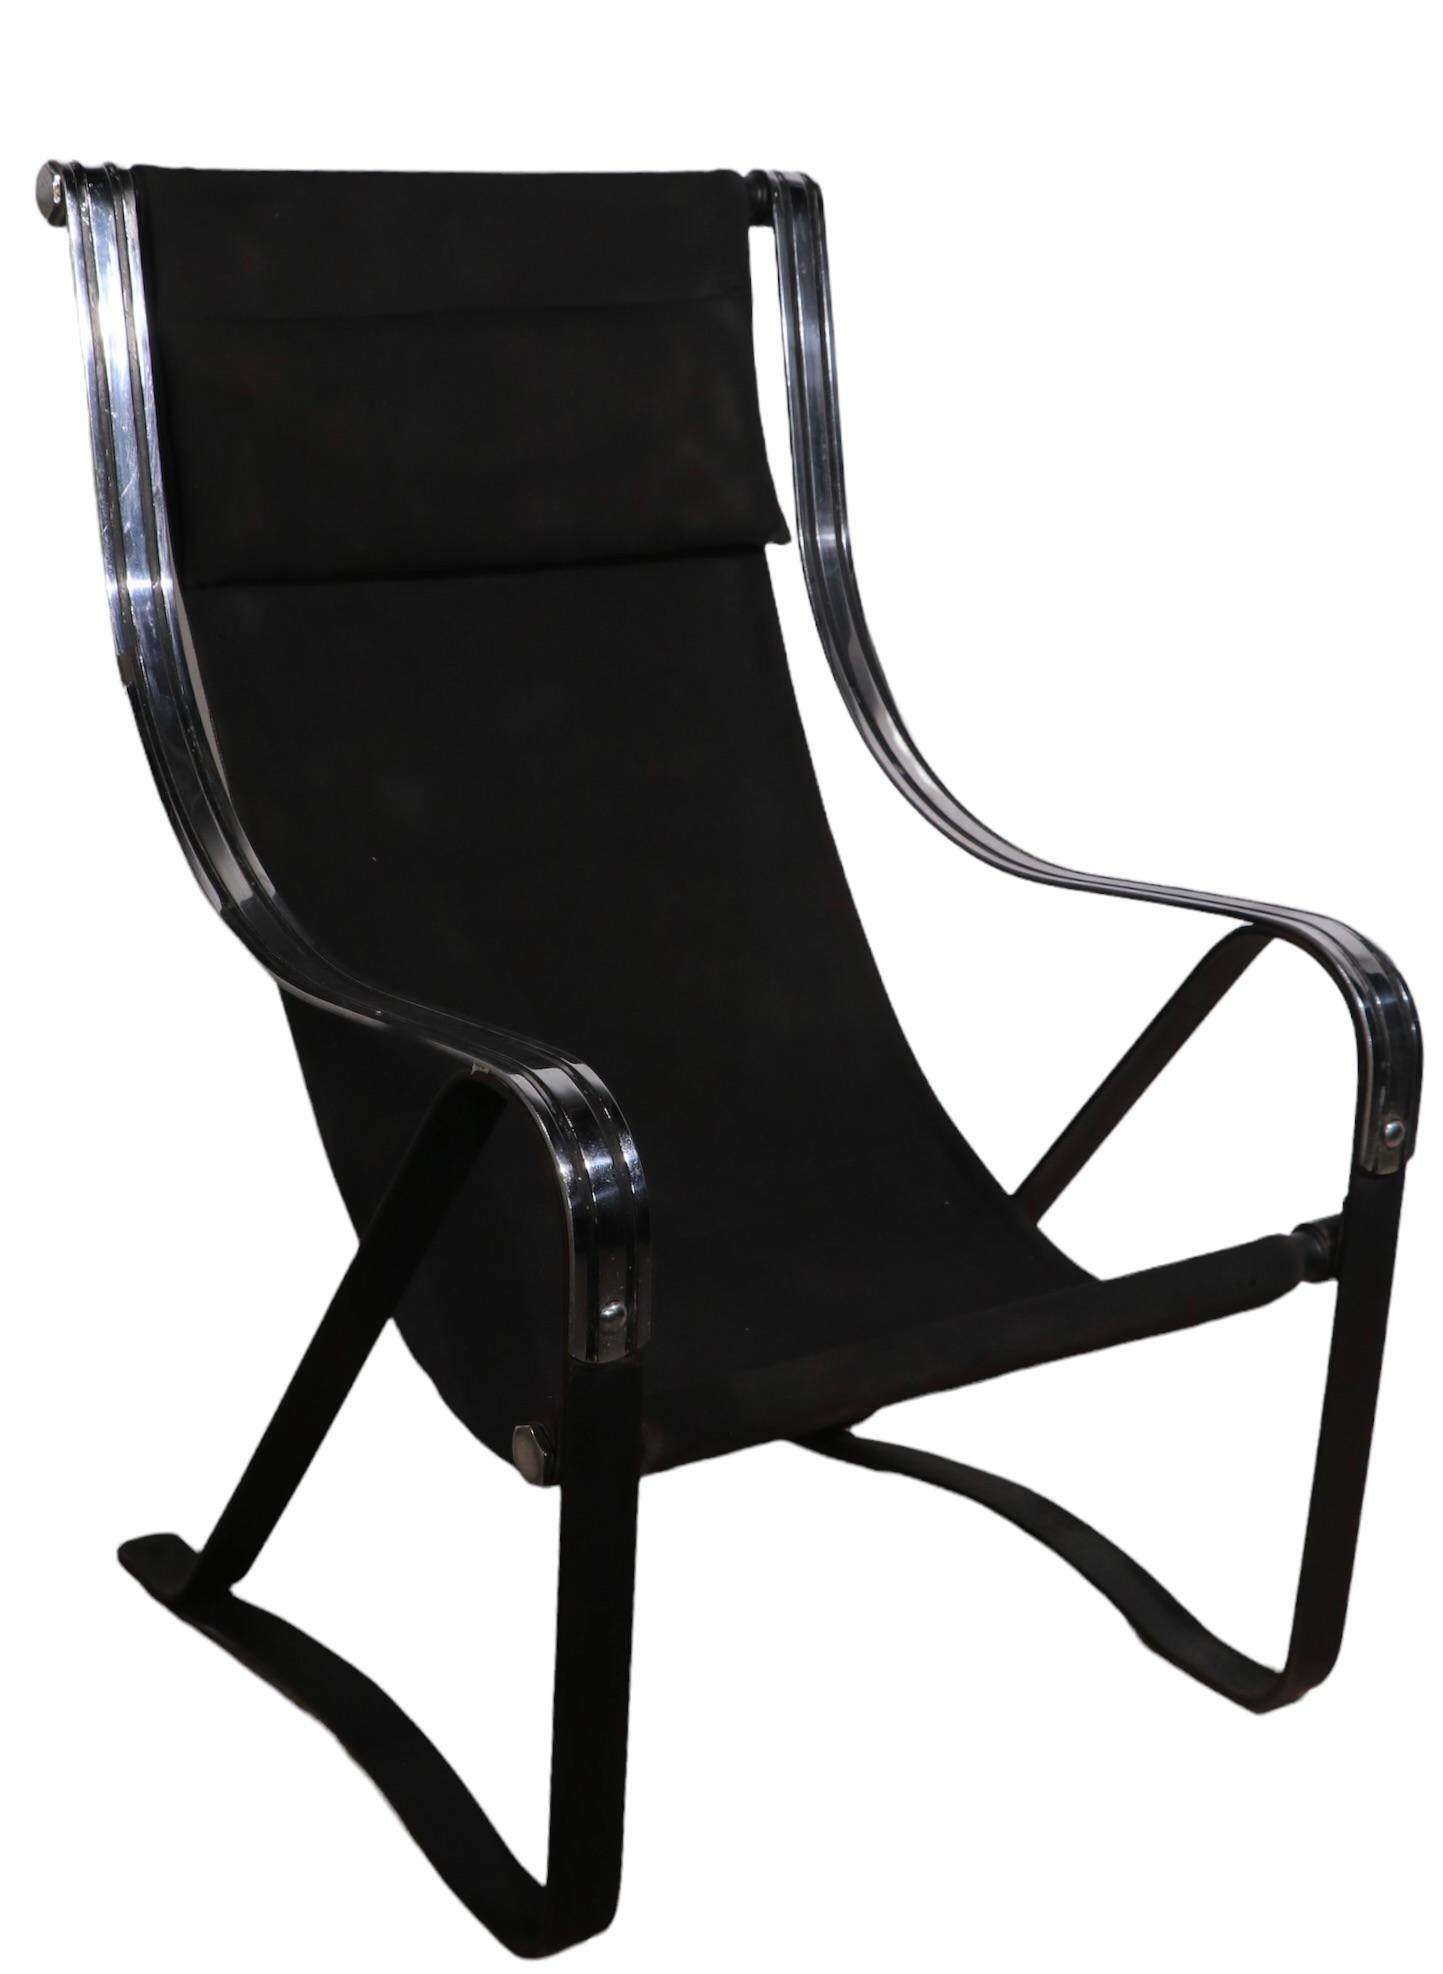 Chrome Art Deco Machine Age Sling Chair by McKay Craft Furniture Company For Sale